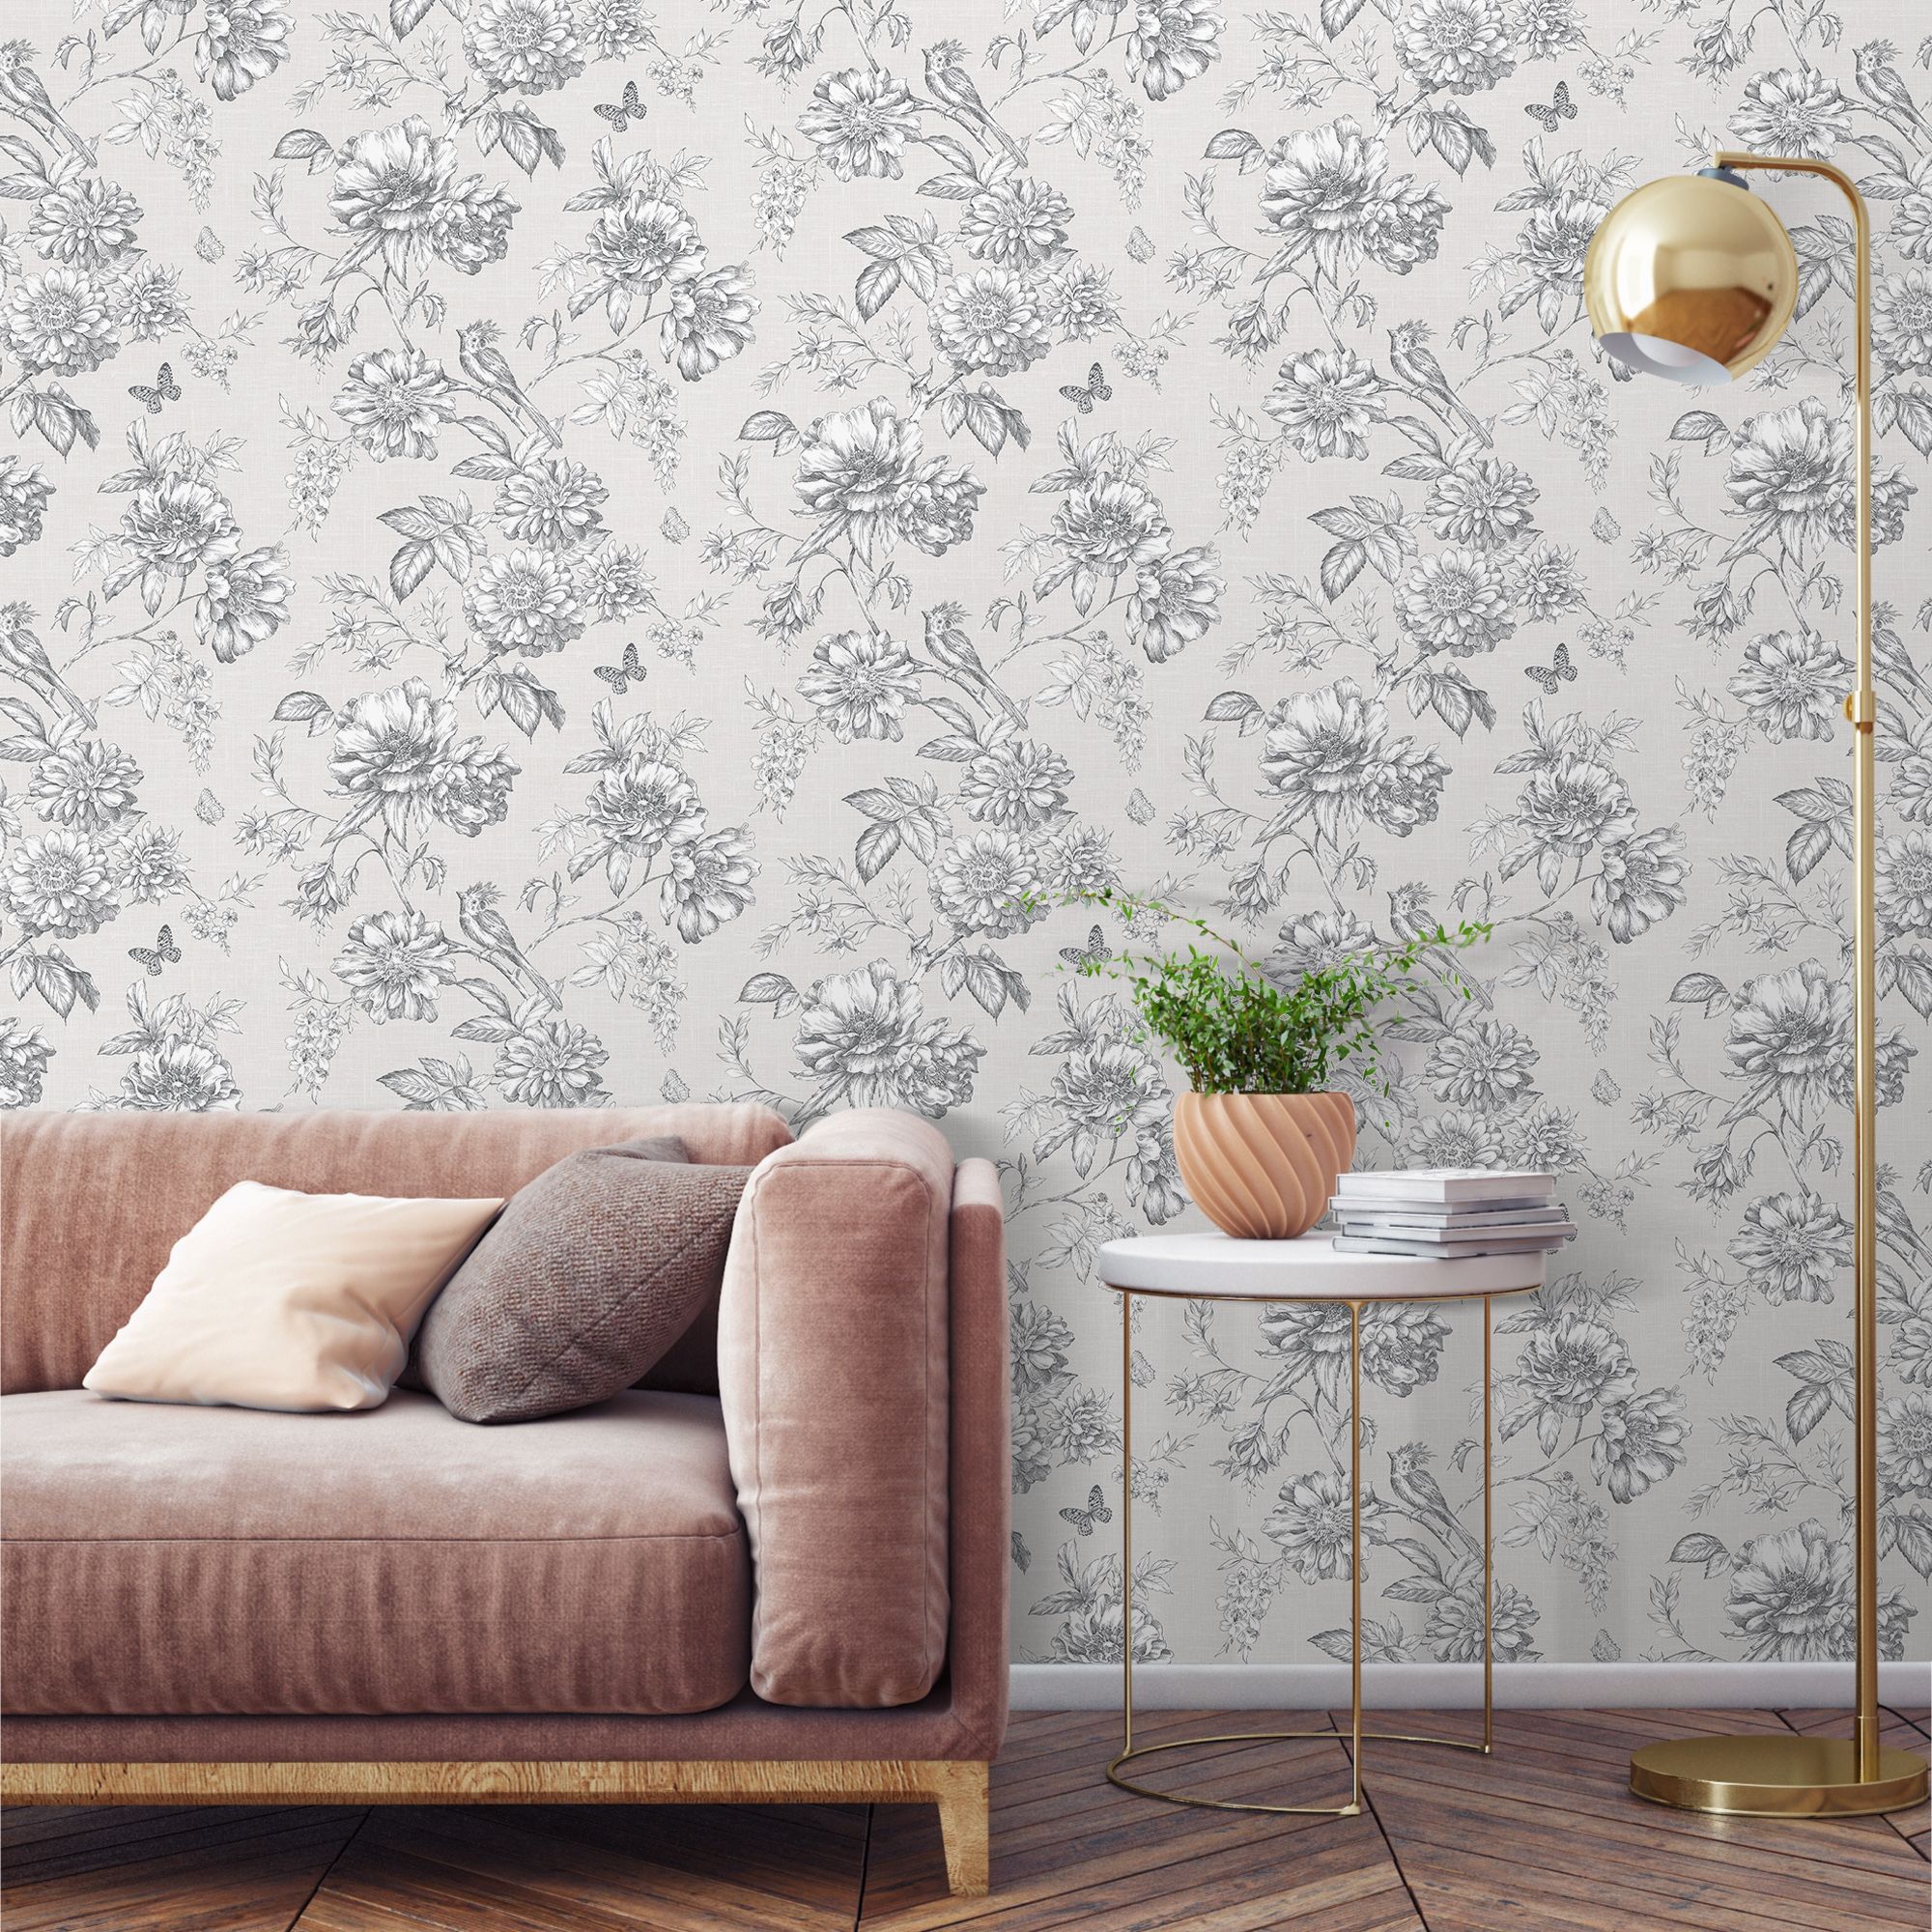 Gold Menagerie Cream & white Floral Mica effect Embossed Wallpaper Sample